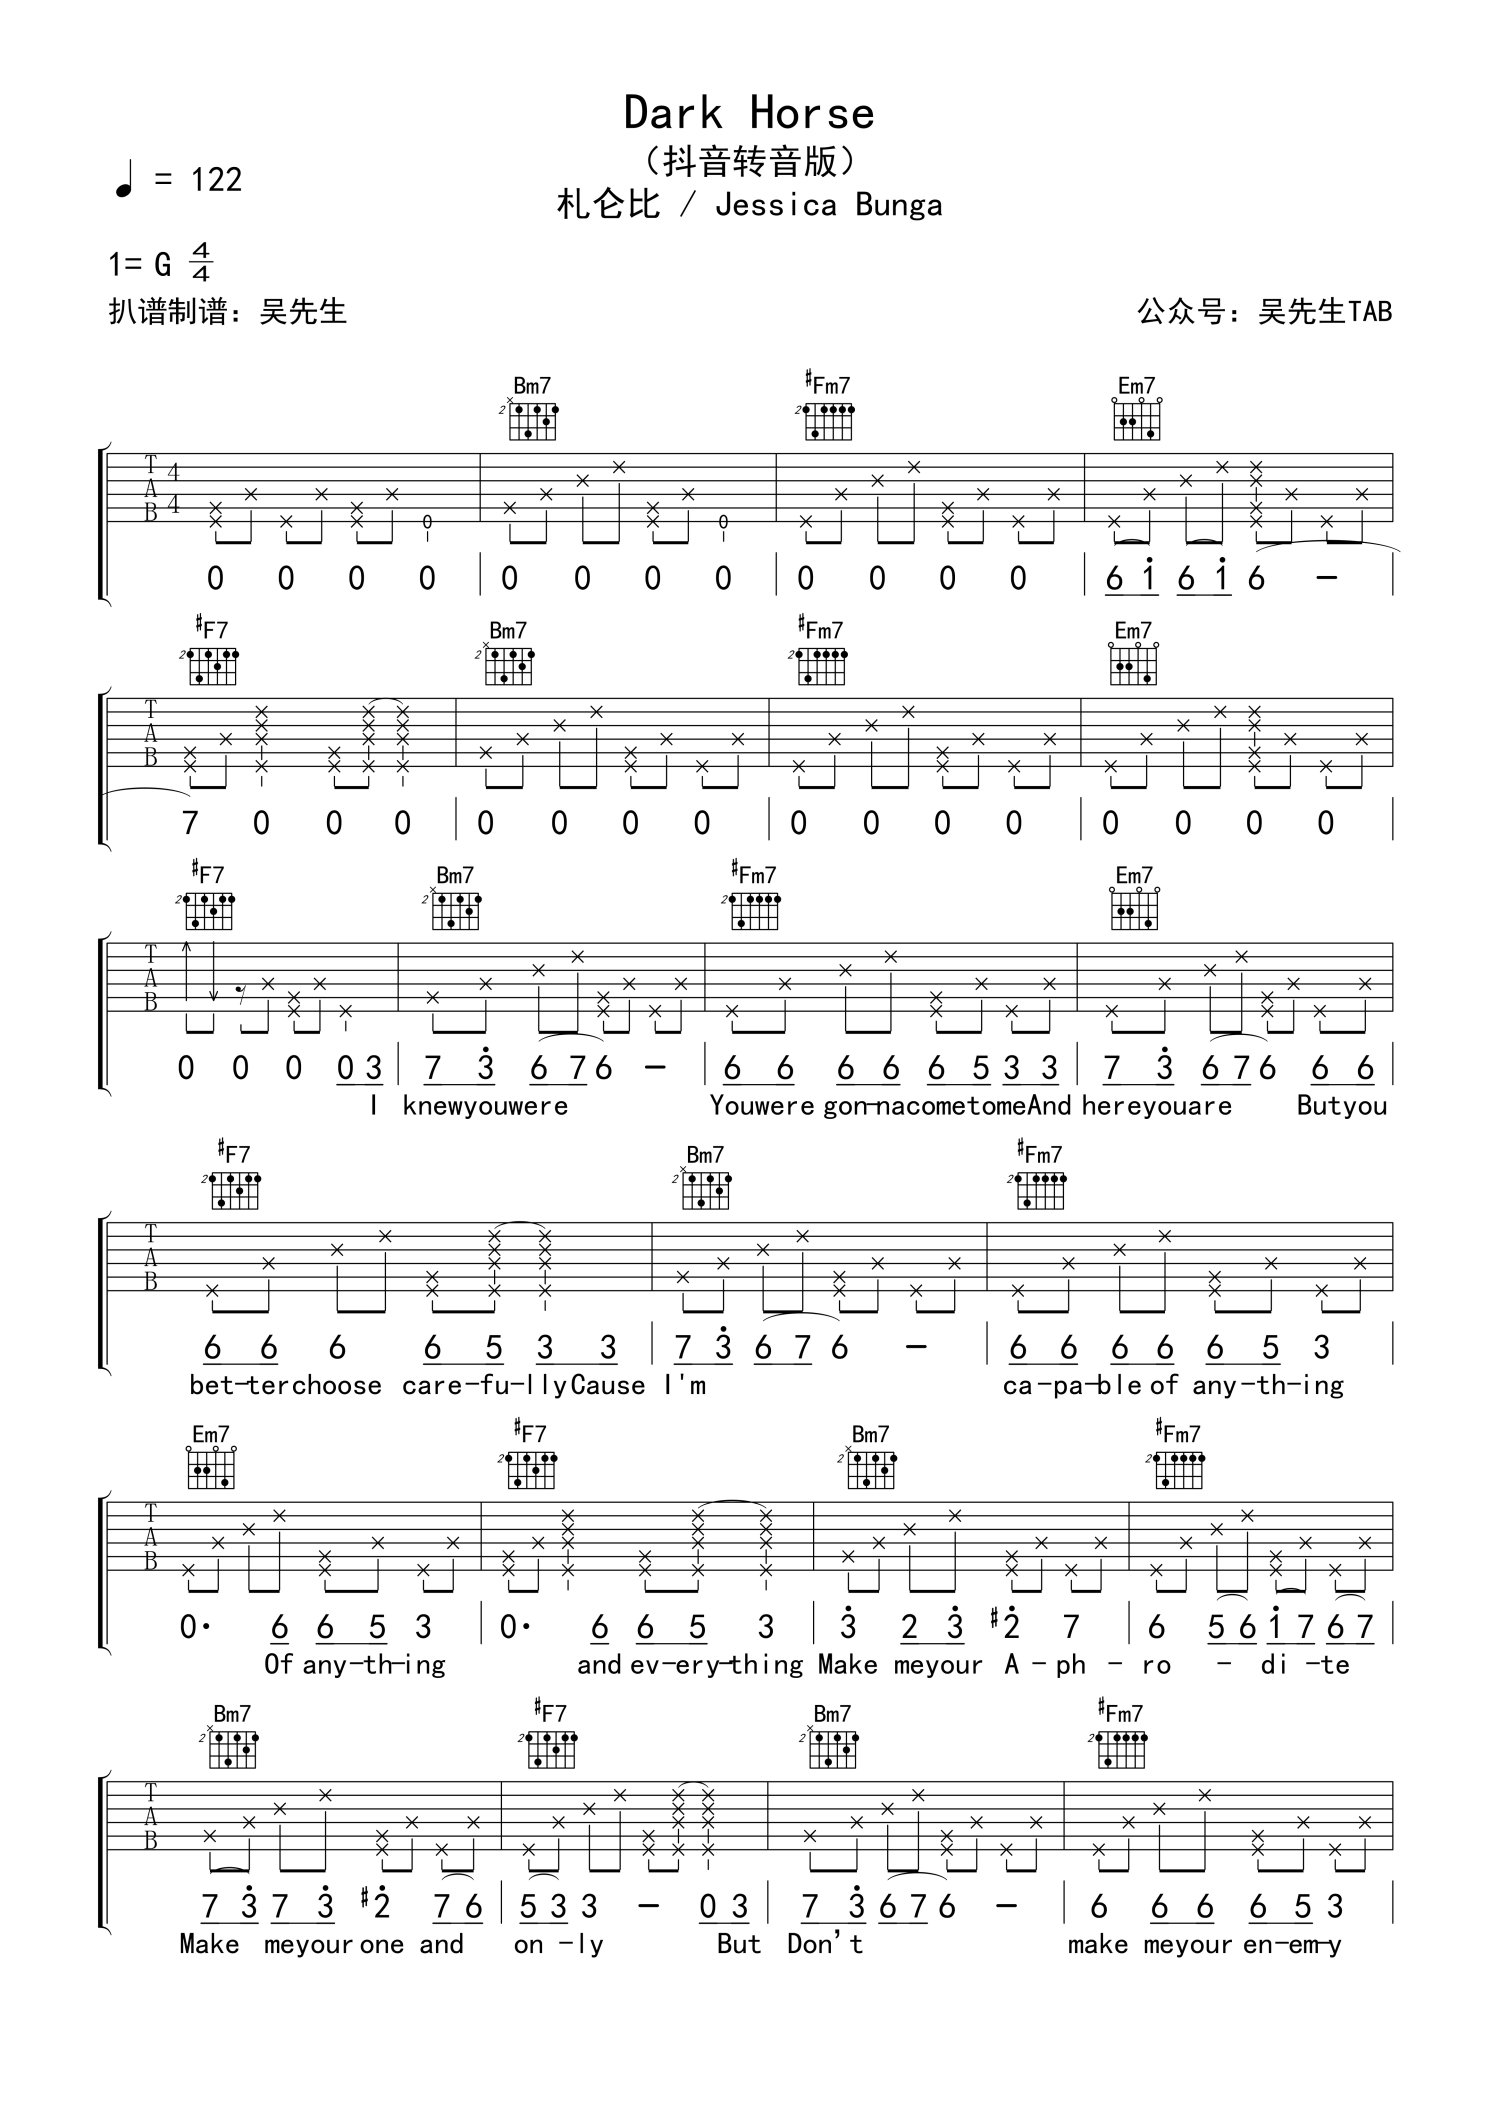 Download Ellie Goulding "Guns And Horses" Sheet Music & Chords | 8-Page Printable Piano, Vocal ...